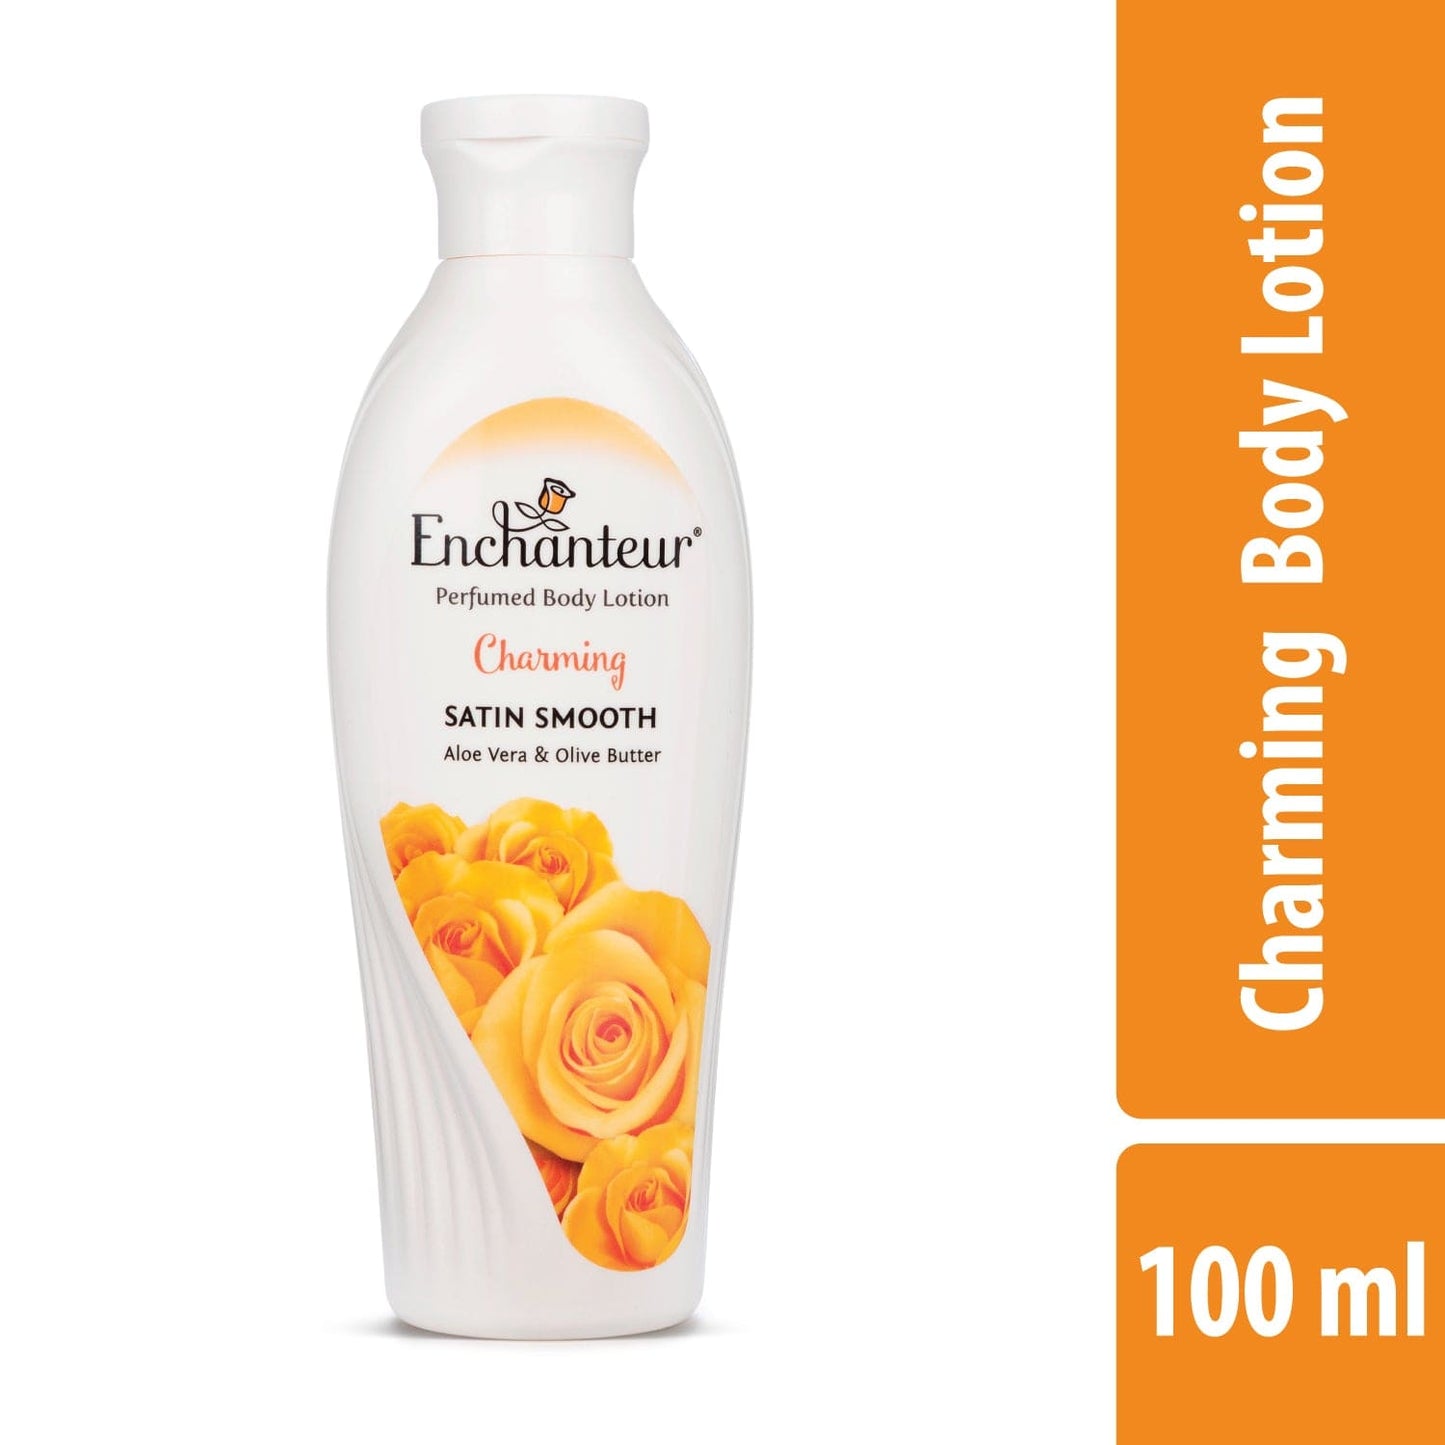 Enchanteur Charming Hand and Body Lotion